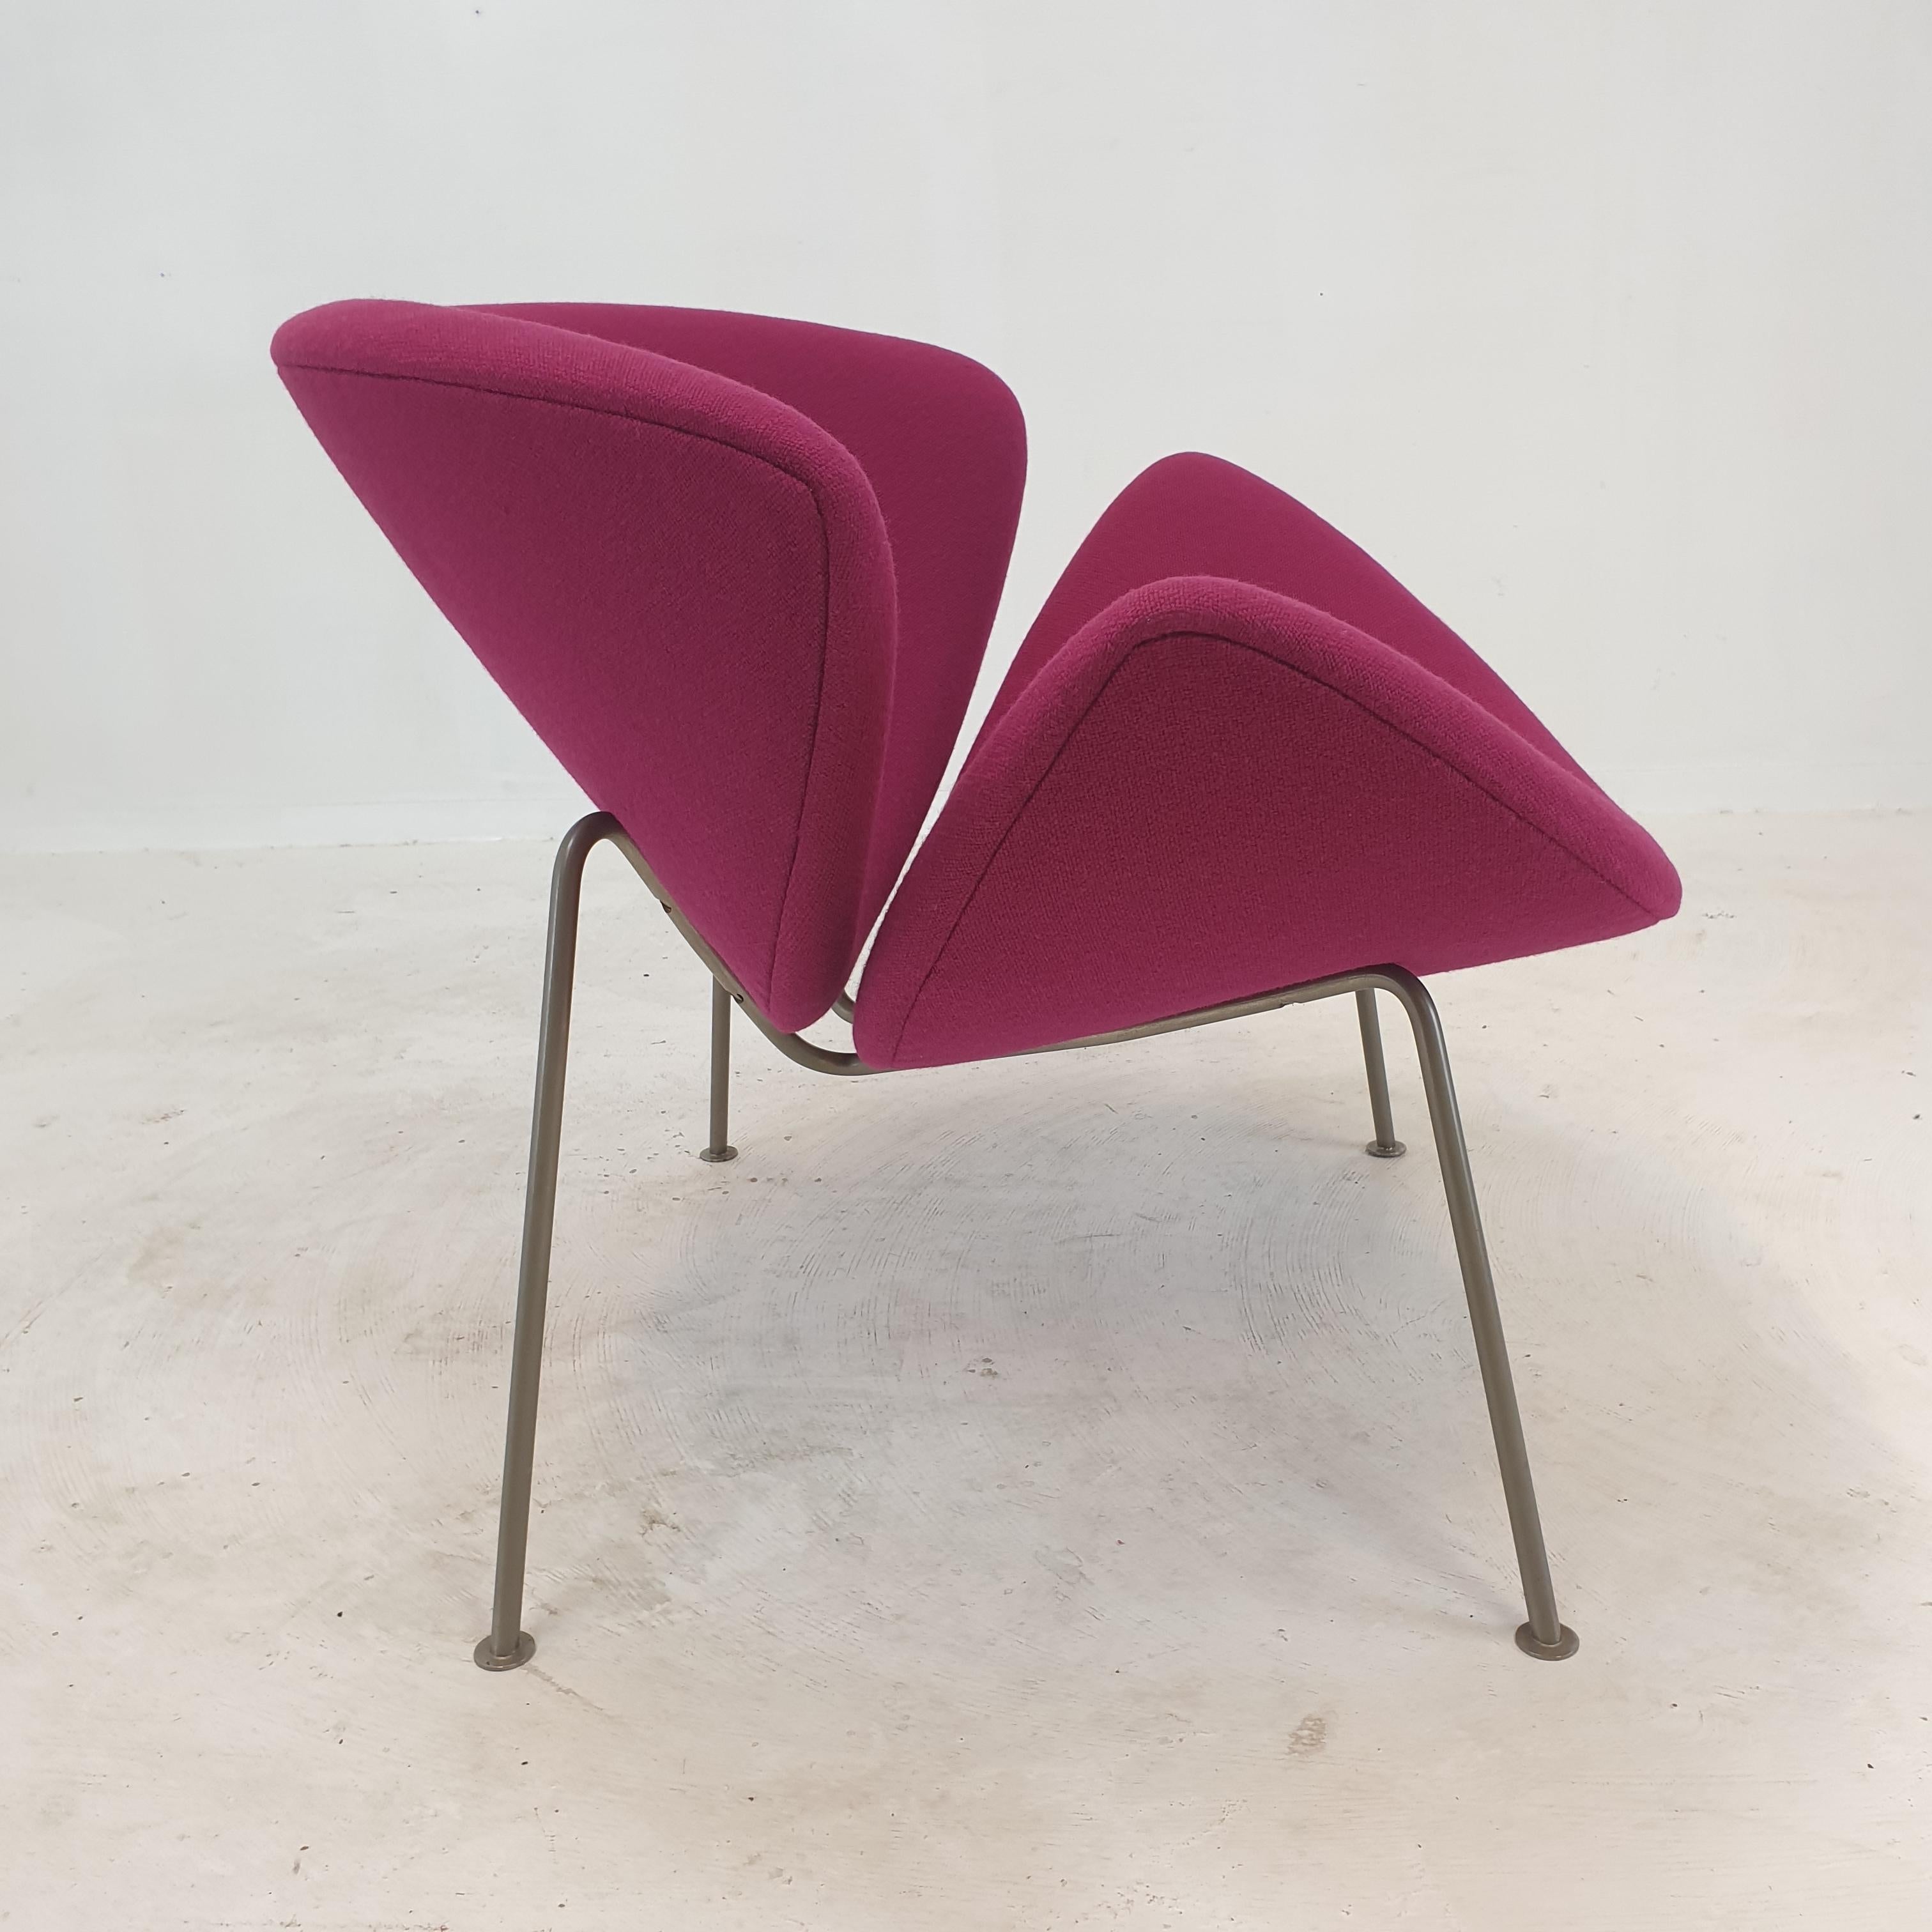 Mid-20th Century Orange Slice Chair by Pierre Paulin for Artifort, 1960s For Sale